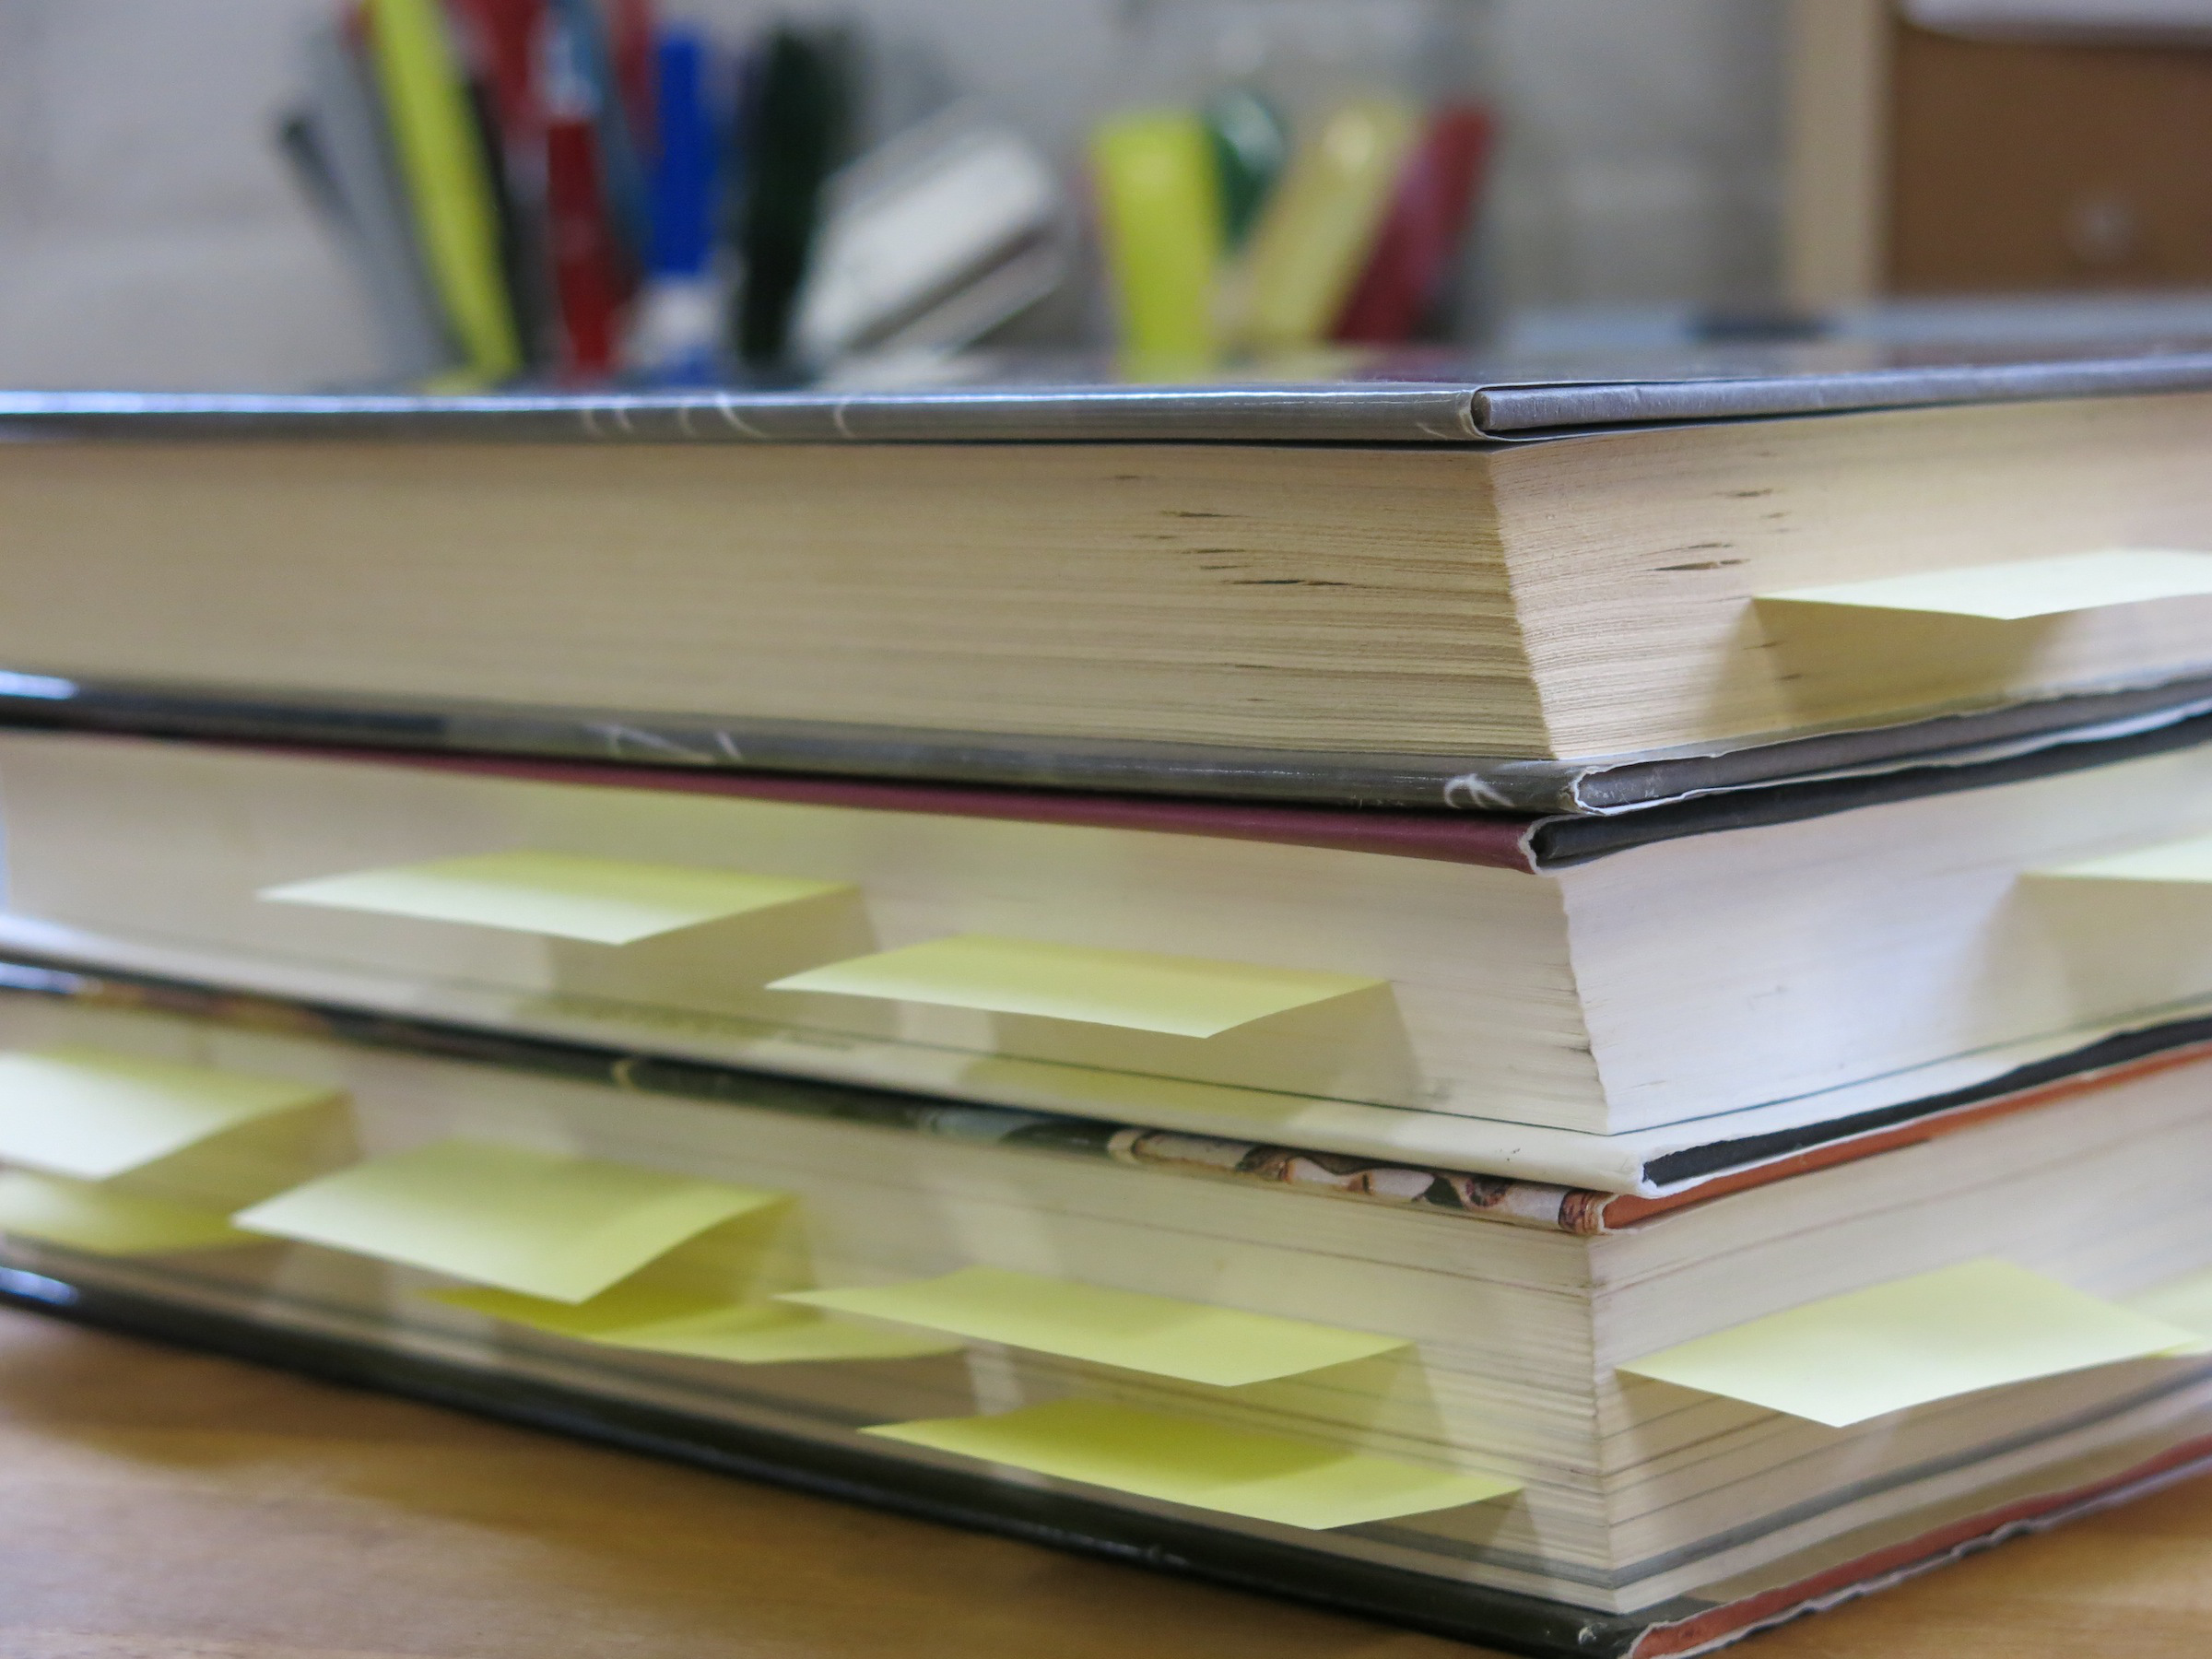 Sticky notes sticking out of novel pages